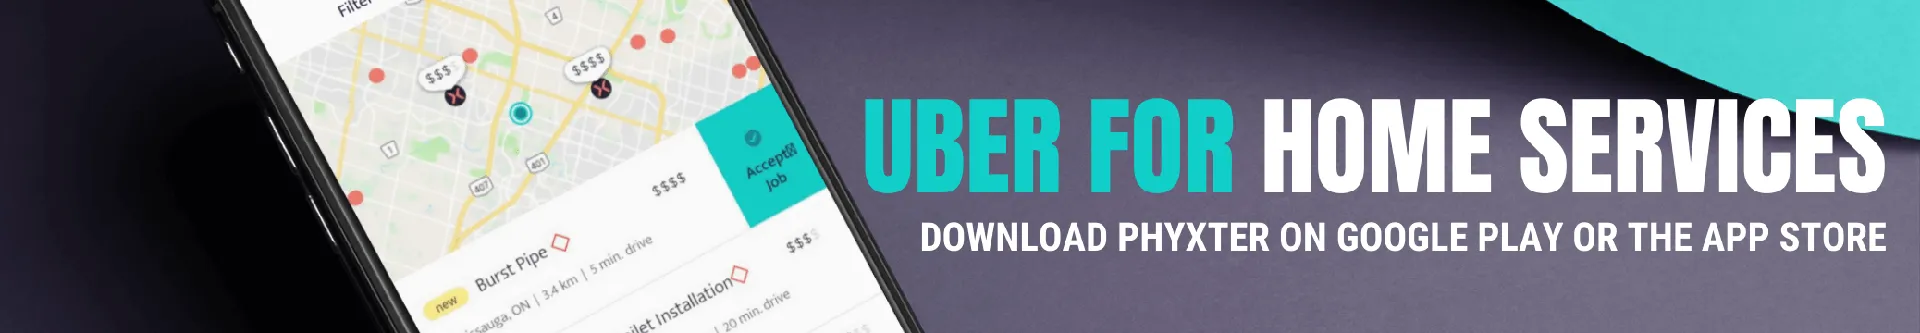 Uber for home services